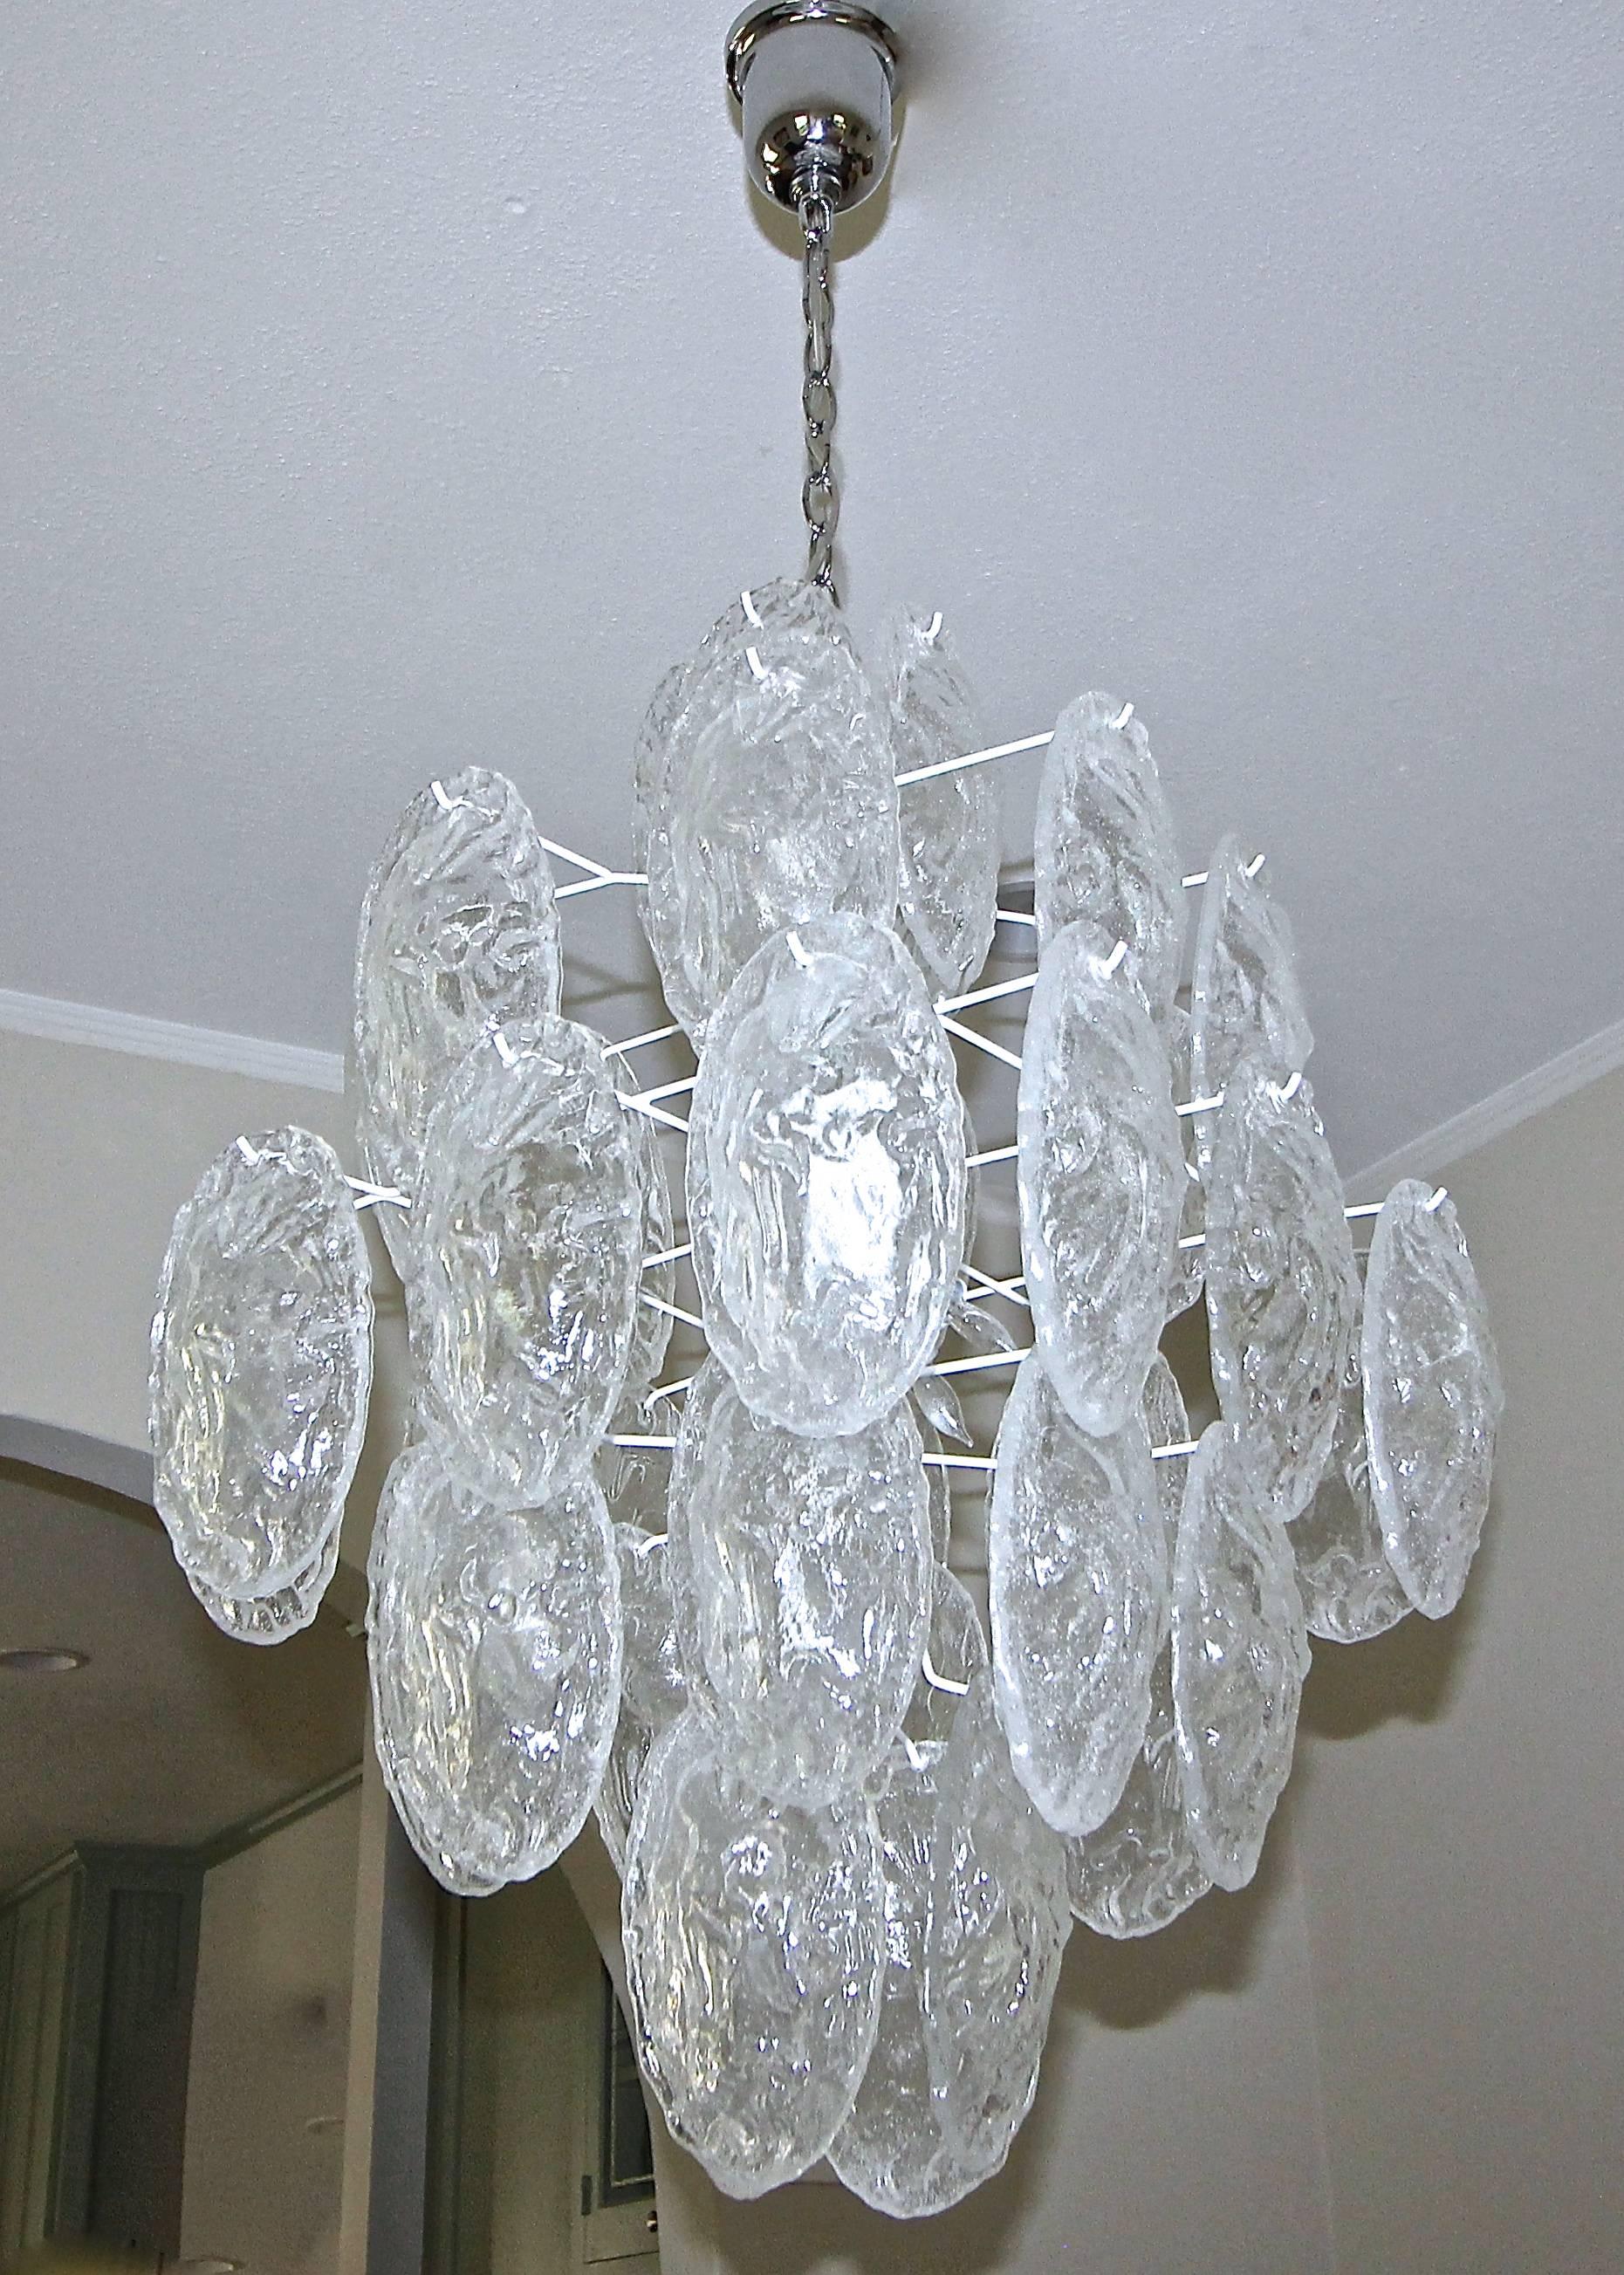 Murano chandelier with textured oval glass discs suspended on a metal frame in a white painted finish. Newly wired for US, fixture uses eight candelabra base bulbs.

Height of chandelier is 29 " X 24.5 " diameter (measured on the